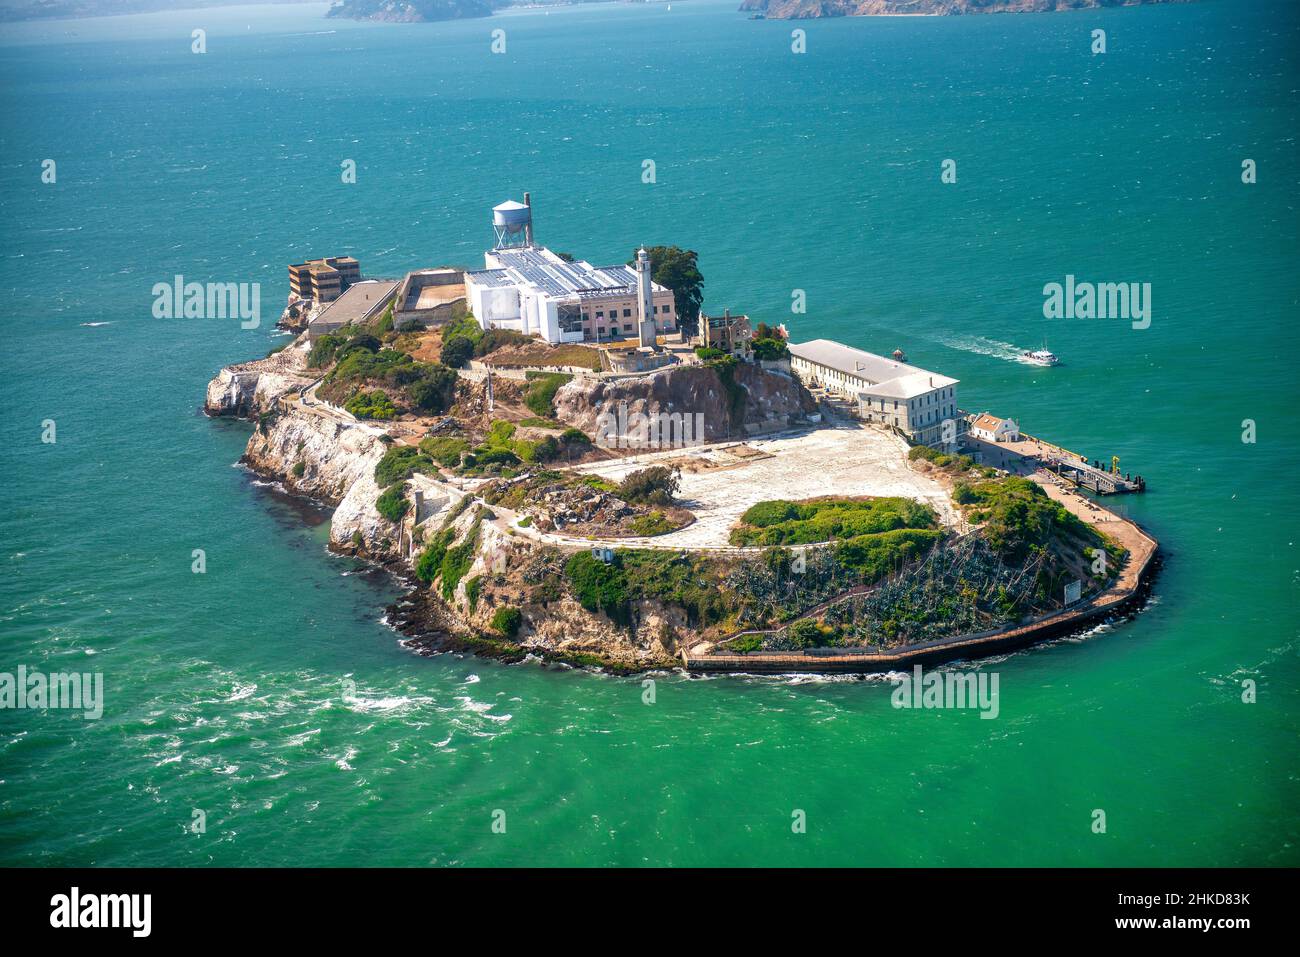 Alcatraz Island and Prison, aerial view from helicopter on a clear sunny day Stock Photo